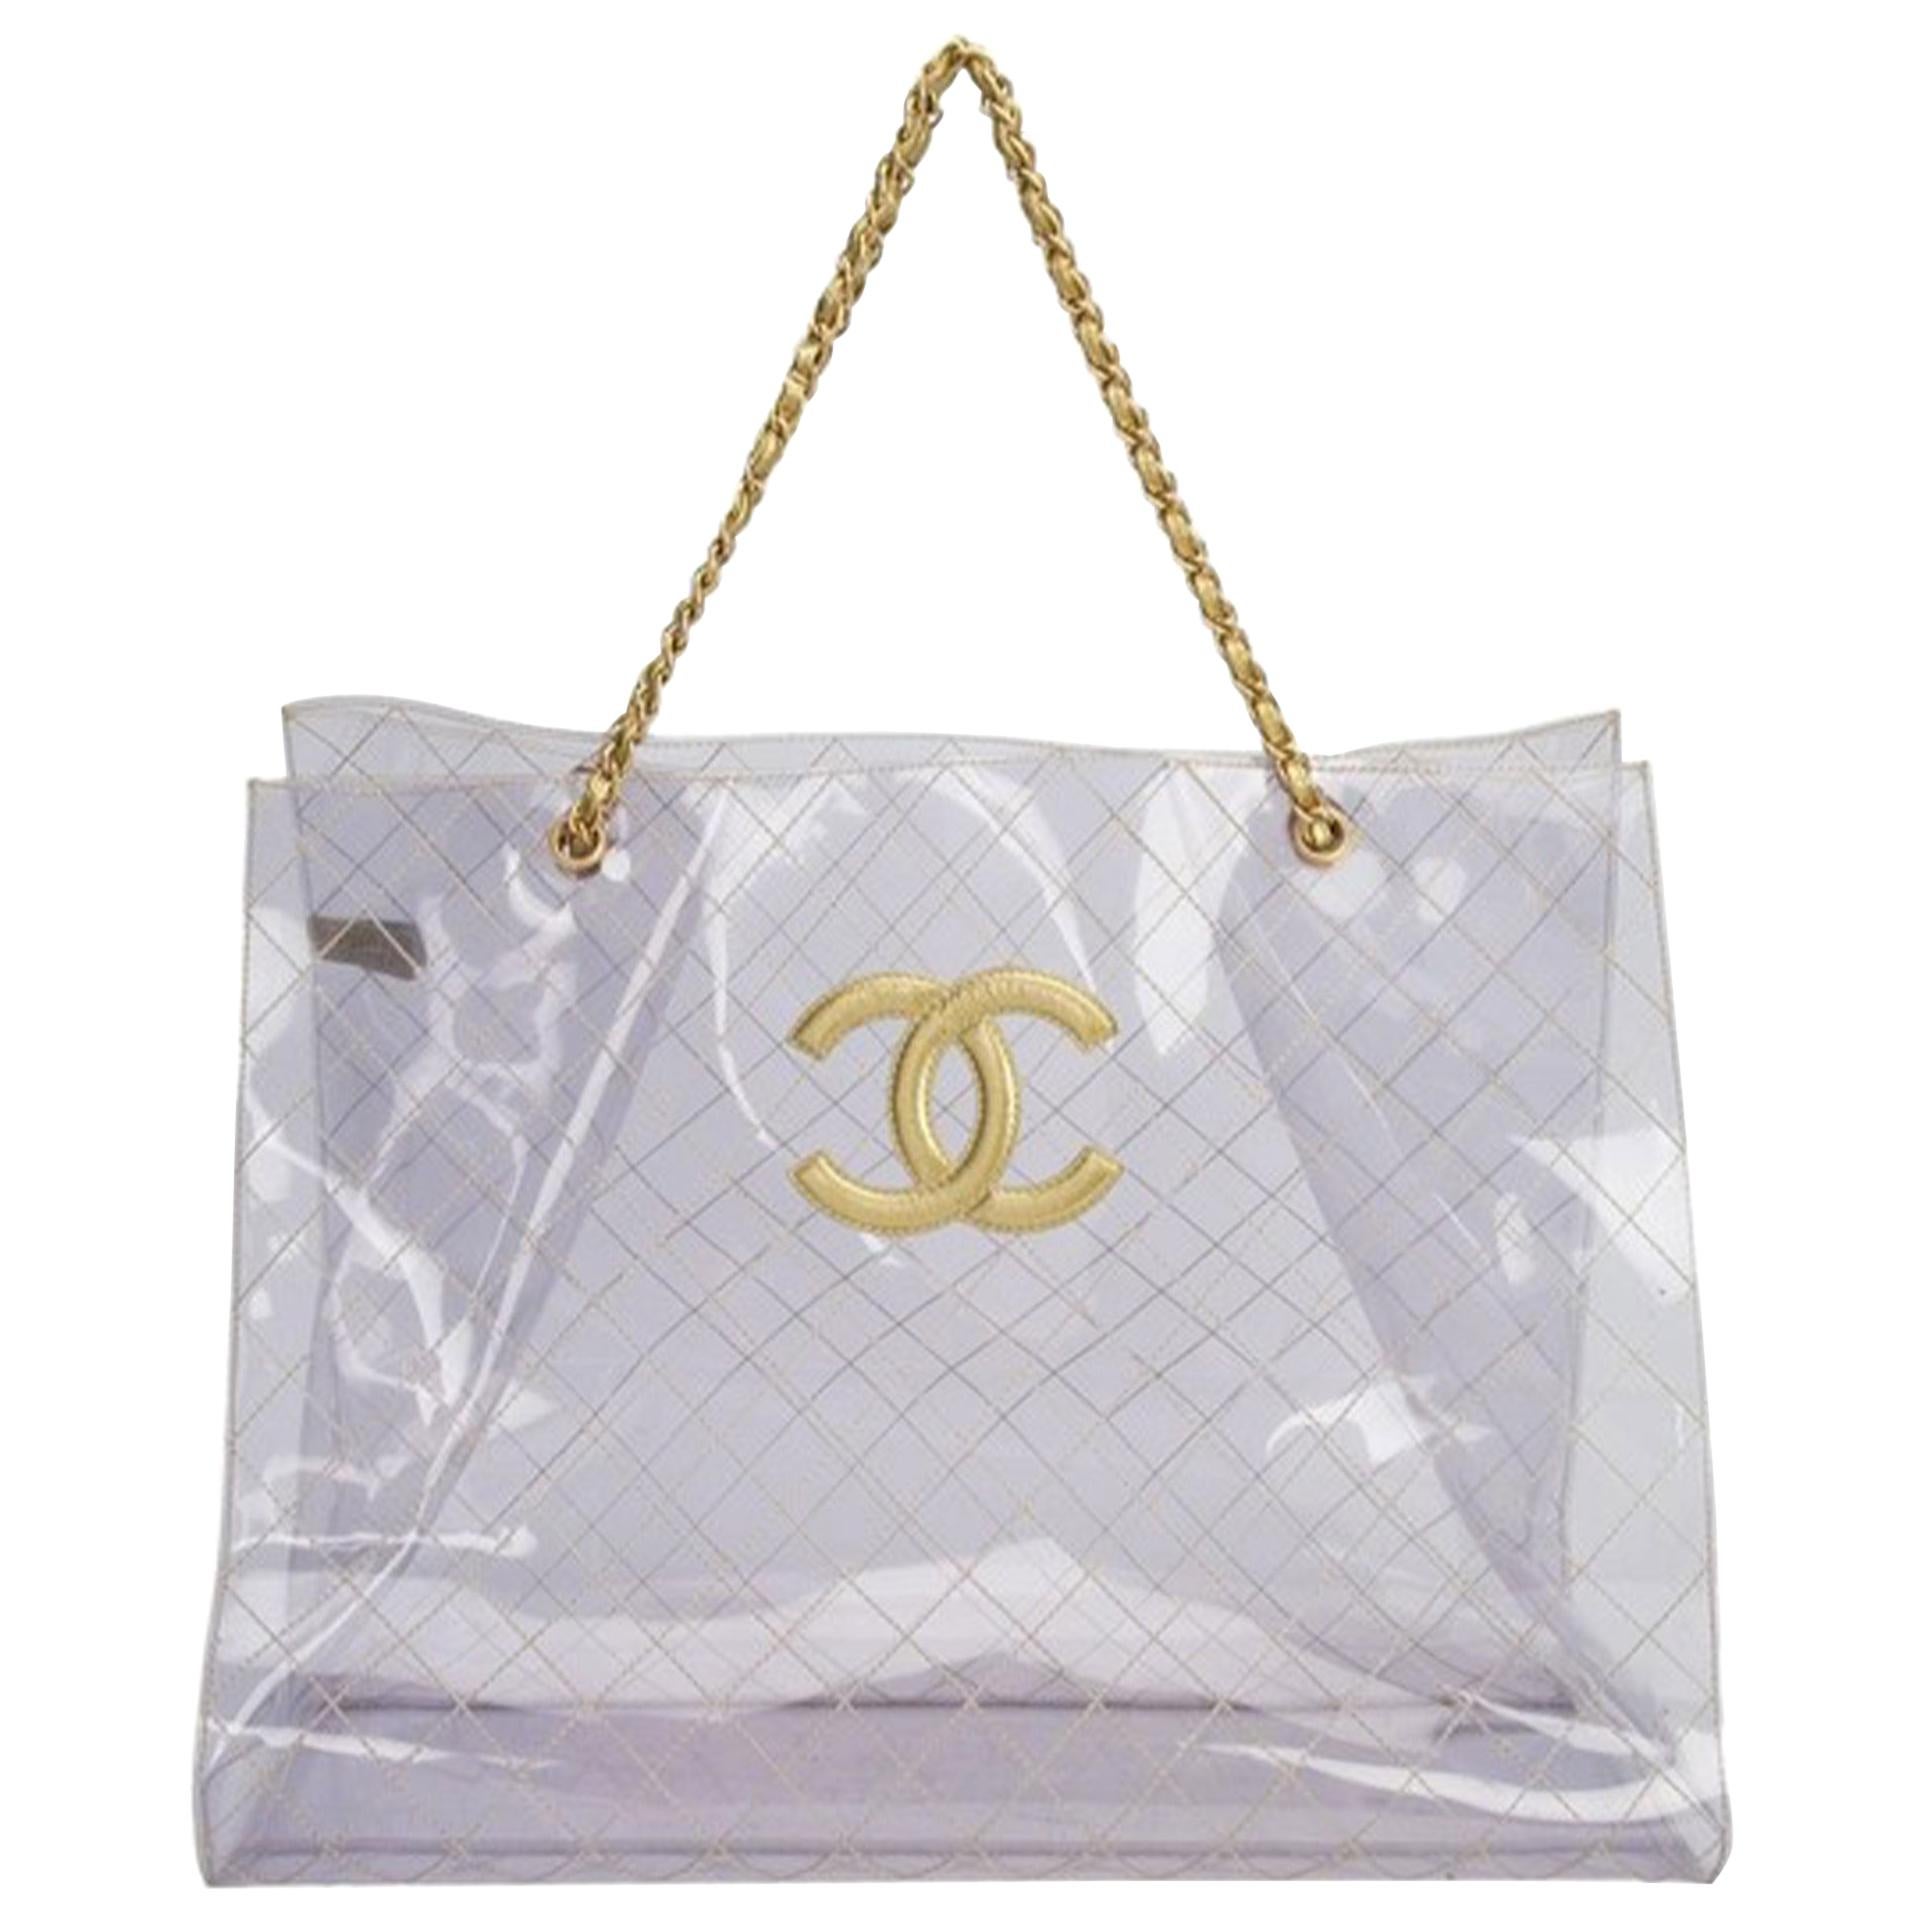 Chanel Rare Vintage 1990s Xxxl Oversized See Through Naked Gold Accent Pvc  Tote